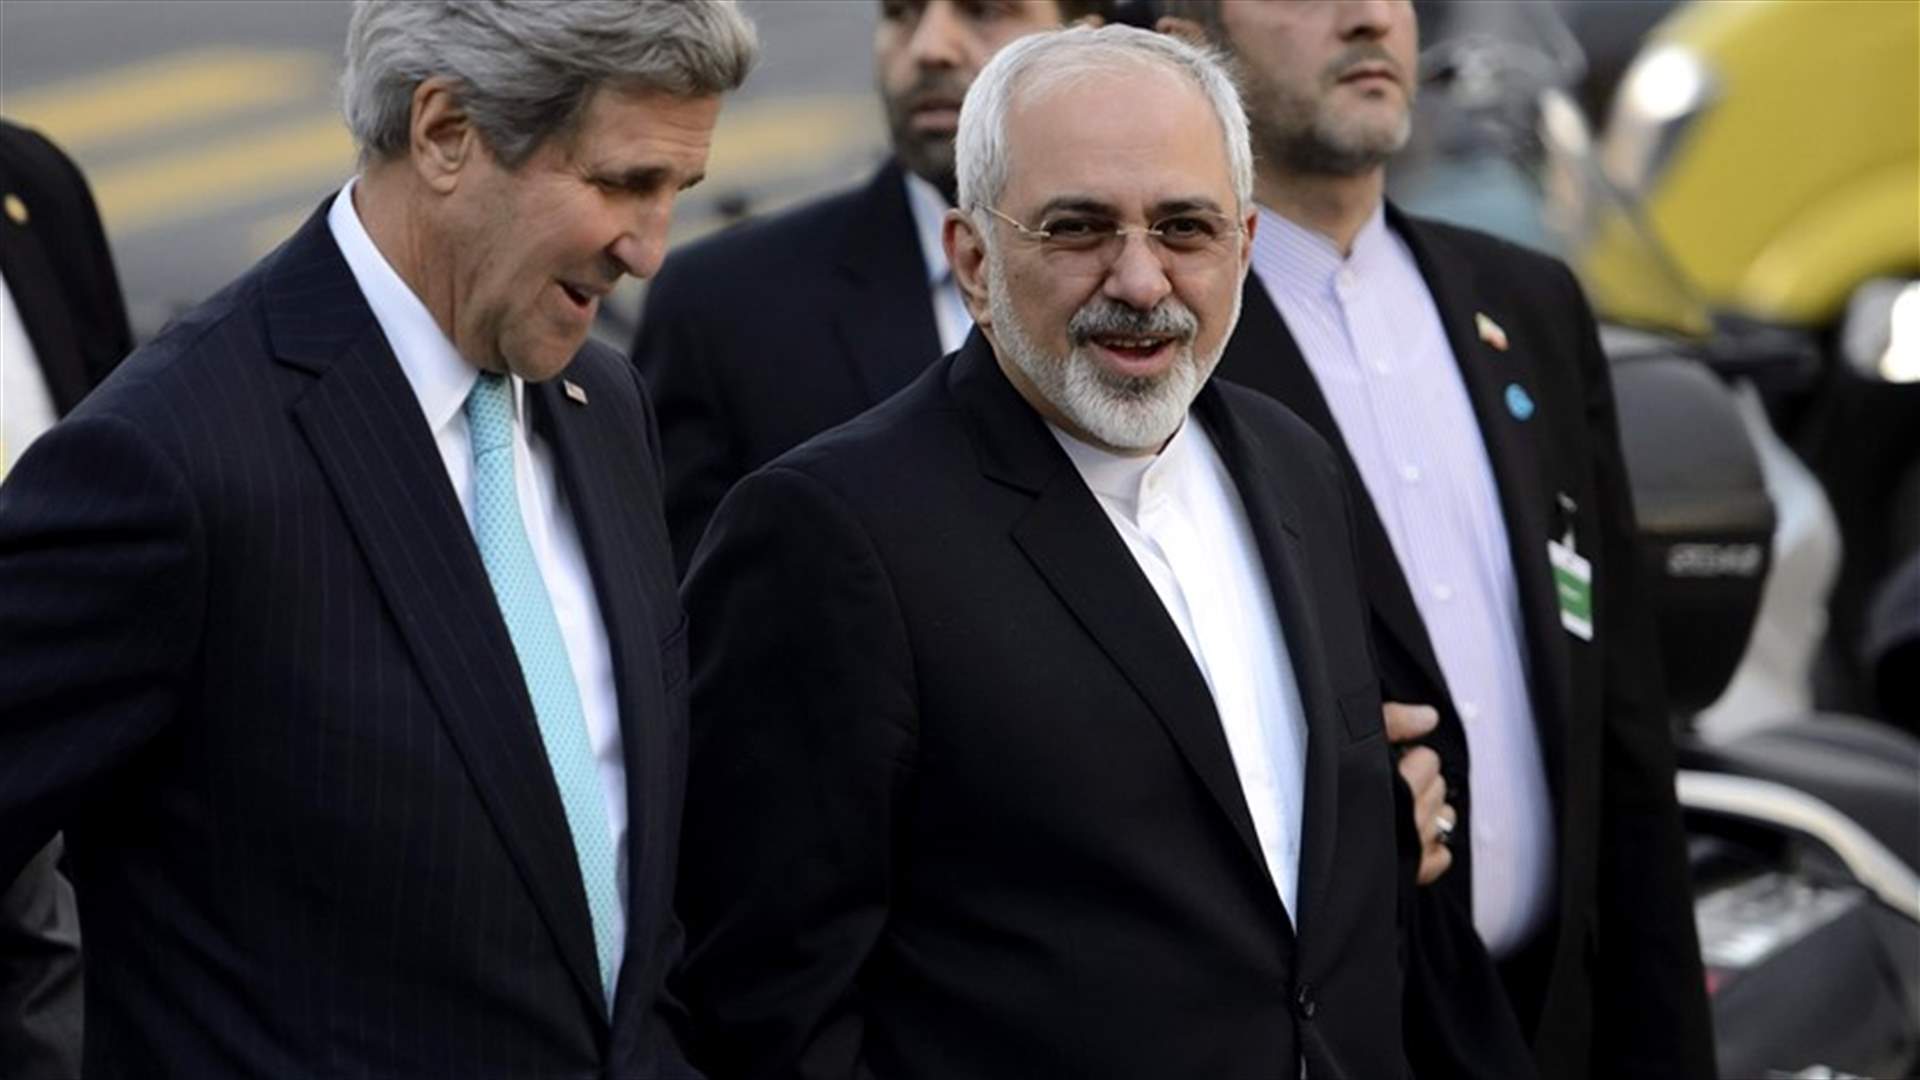 Kerry and Iran&#39;s Zarif discuss ways to renew Syrian truce, deliver aid